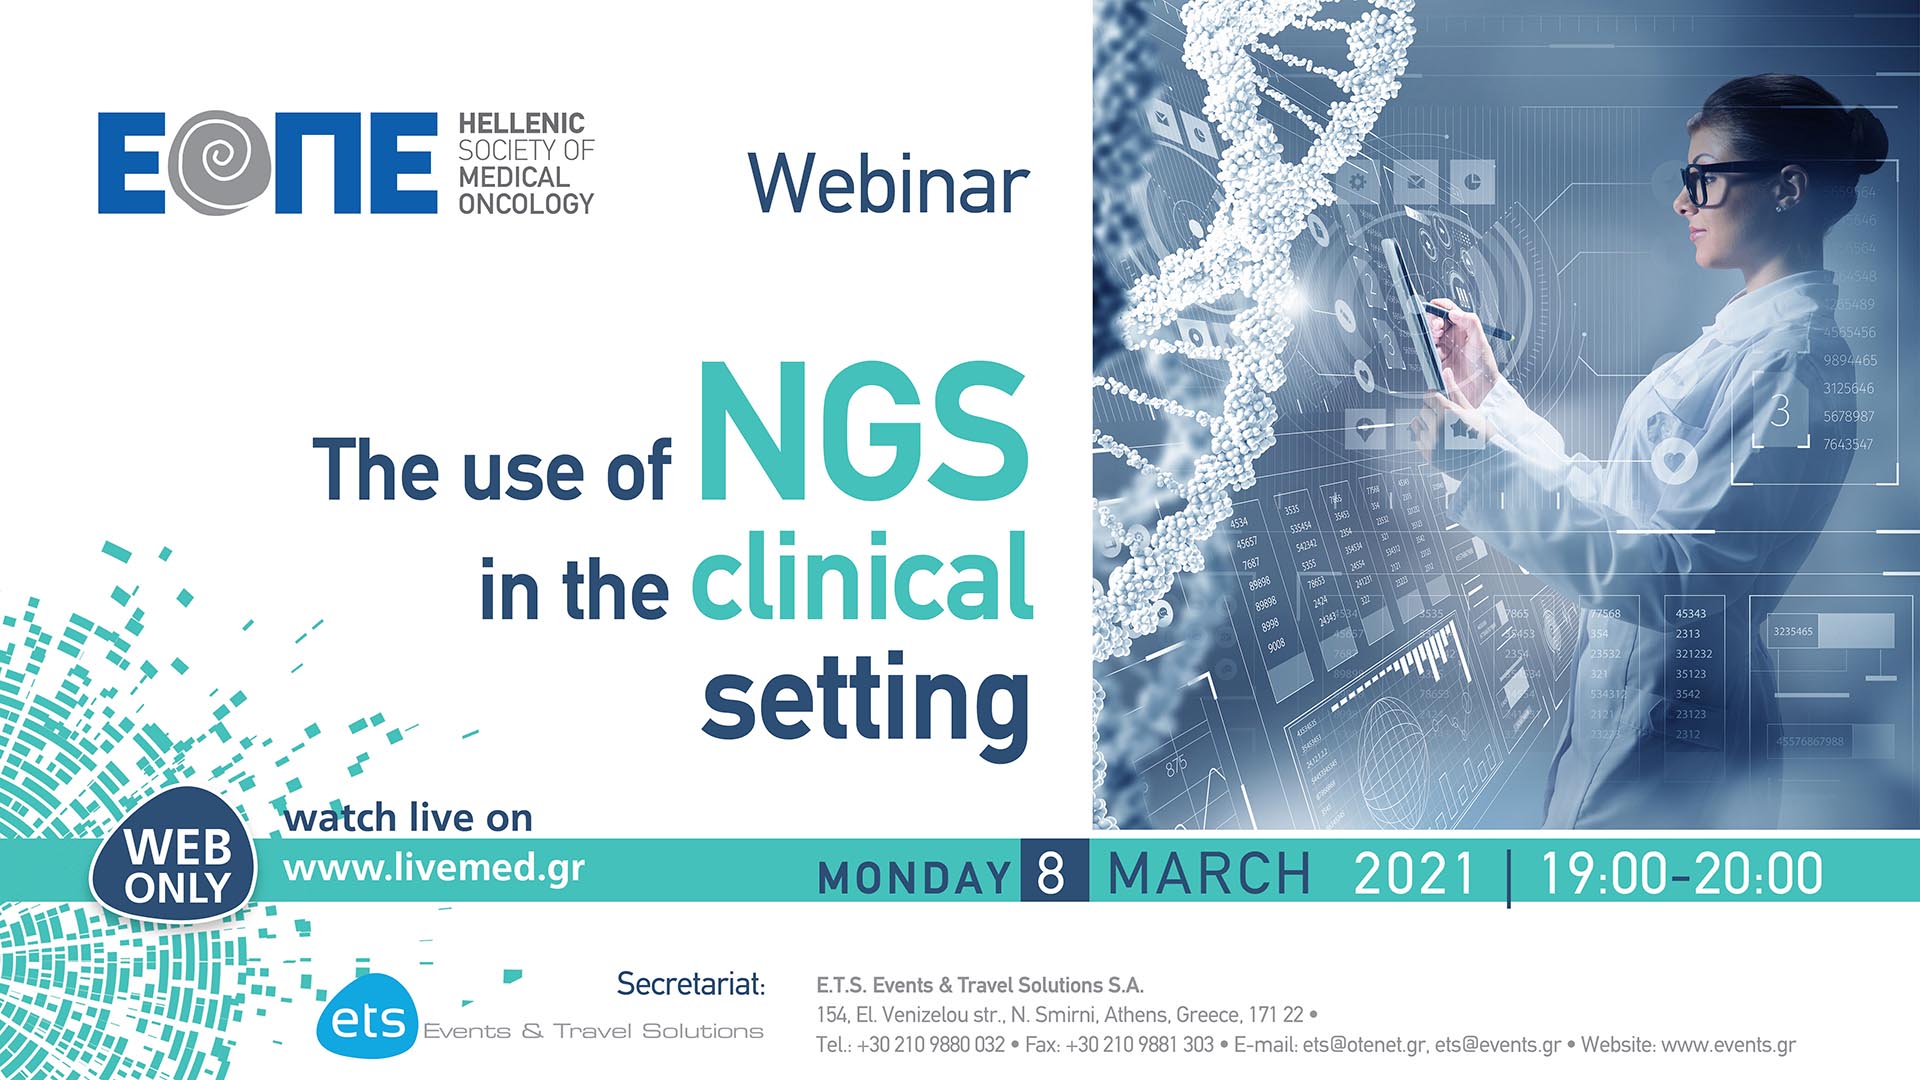 Webinar: The use of NGS in the clinical setting